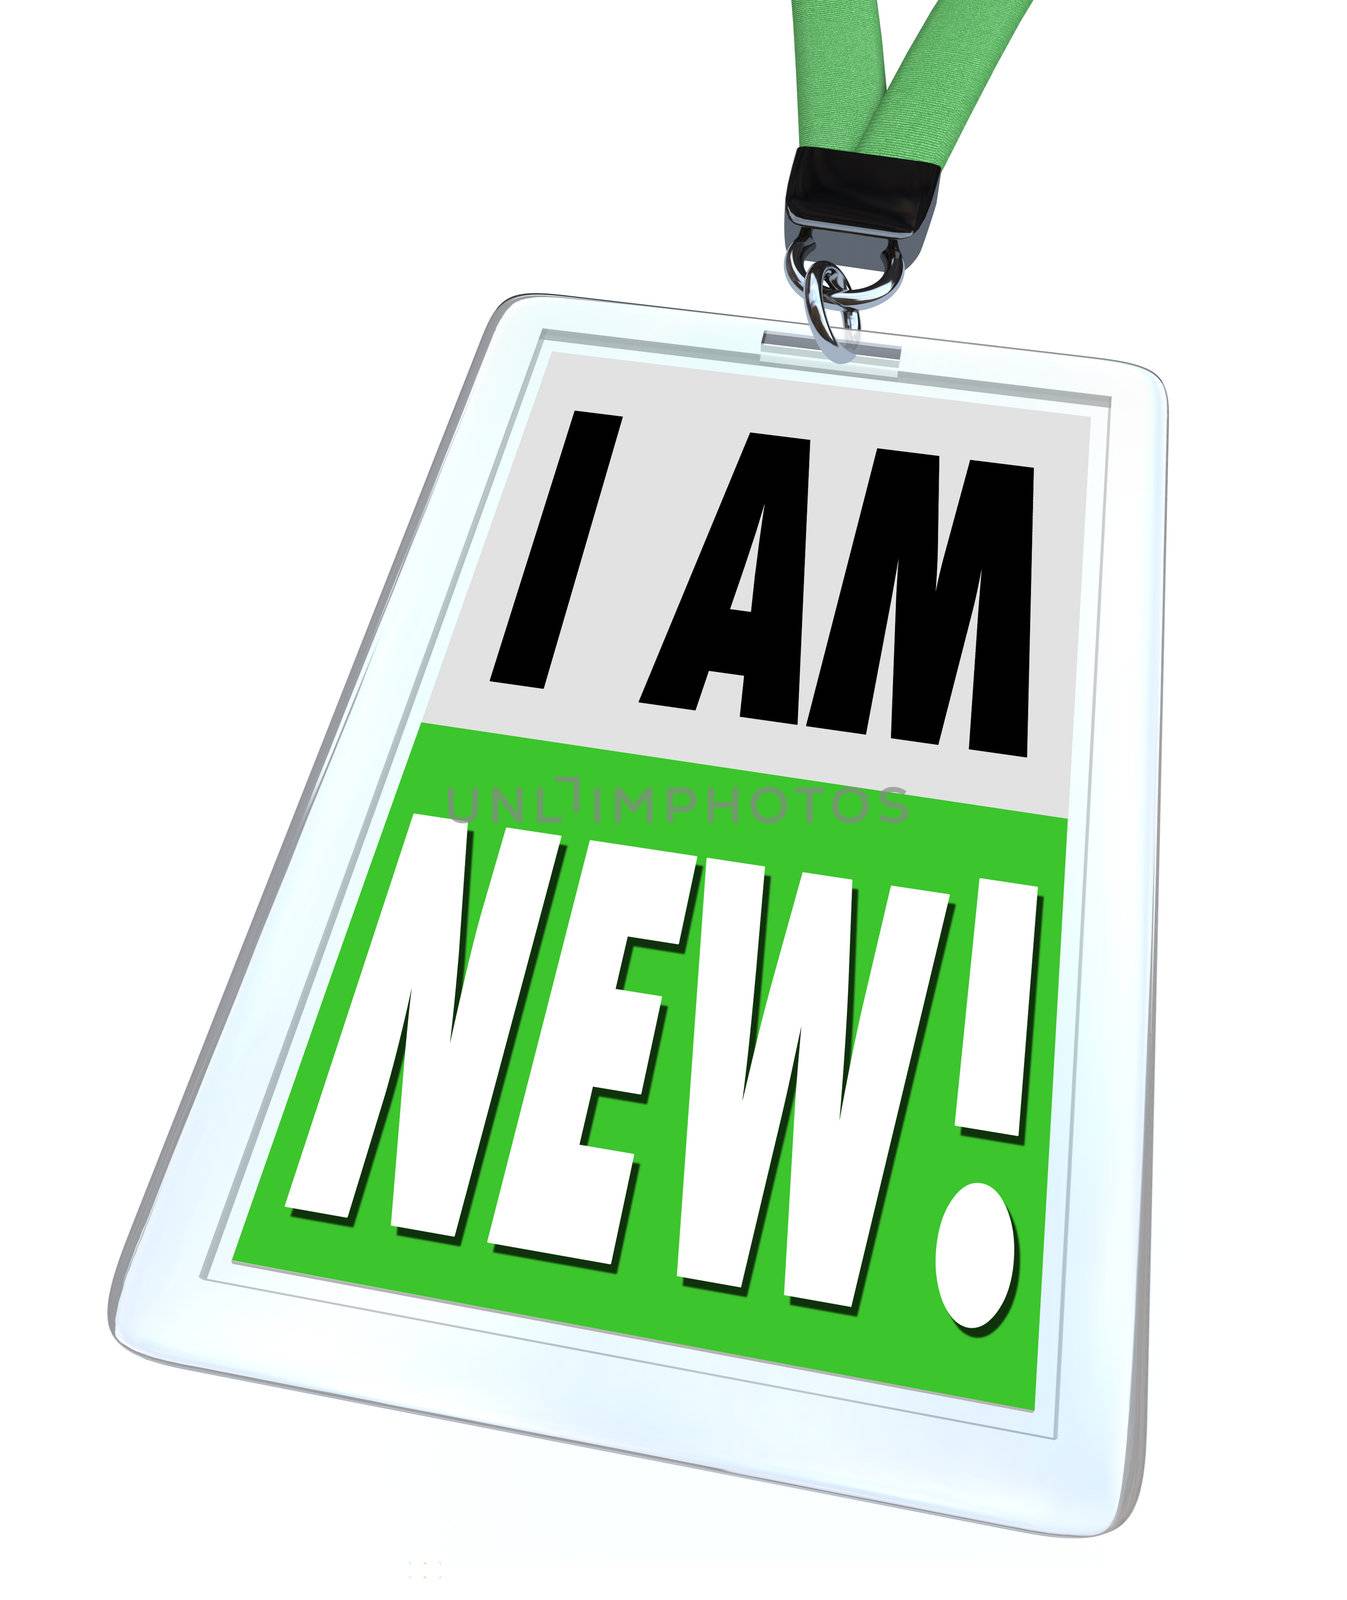 The words I Am New on a green badge and lanyard to help a recently hired employee meet co-workers or indicate a product is improved and updated